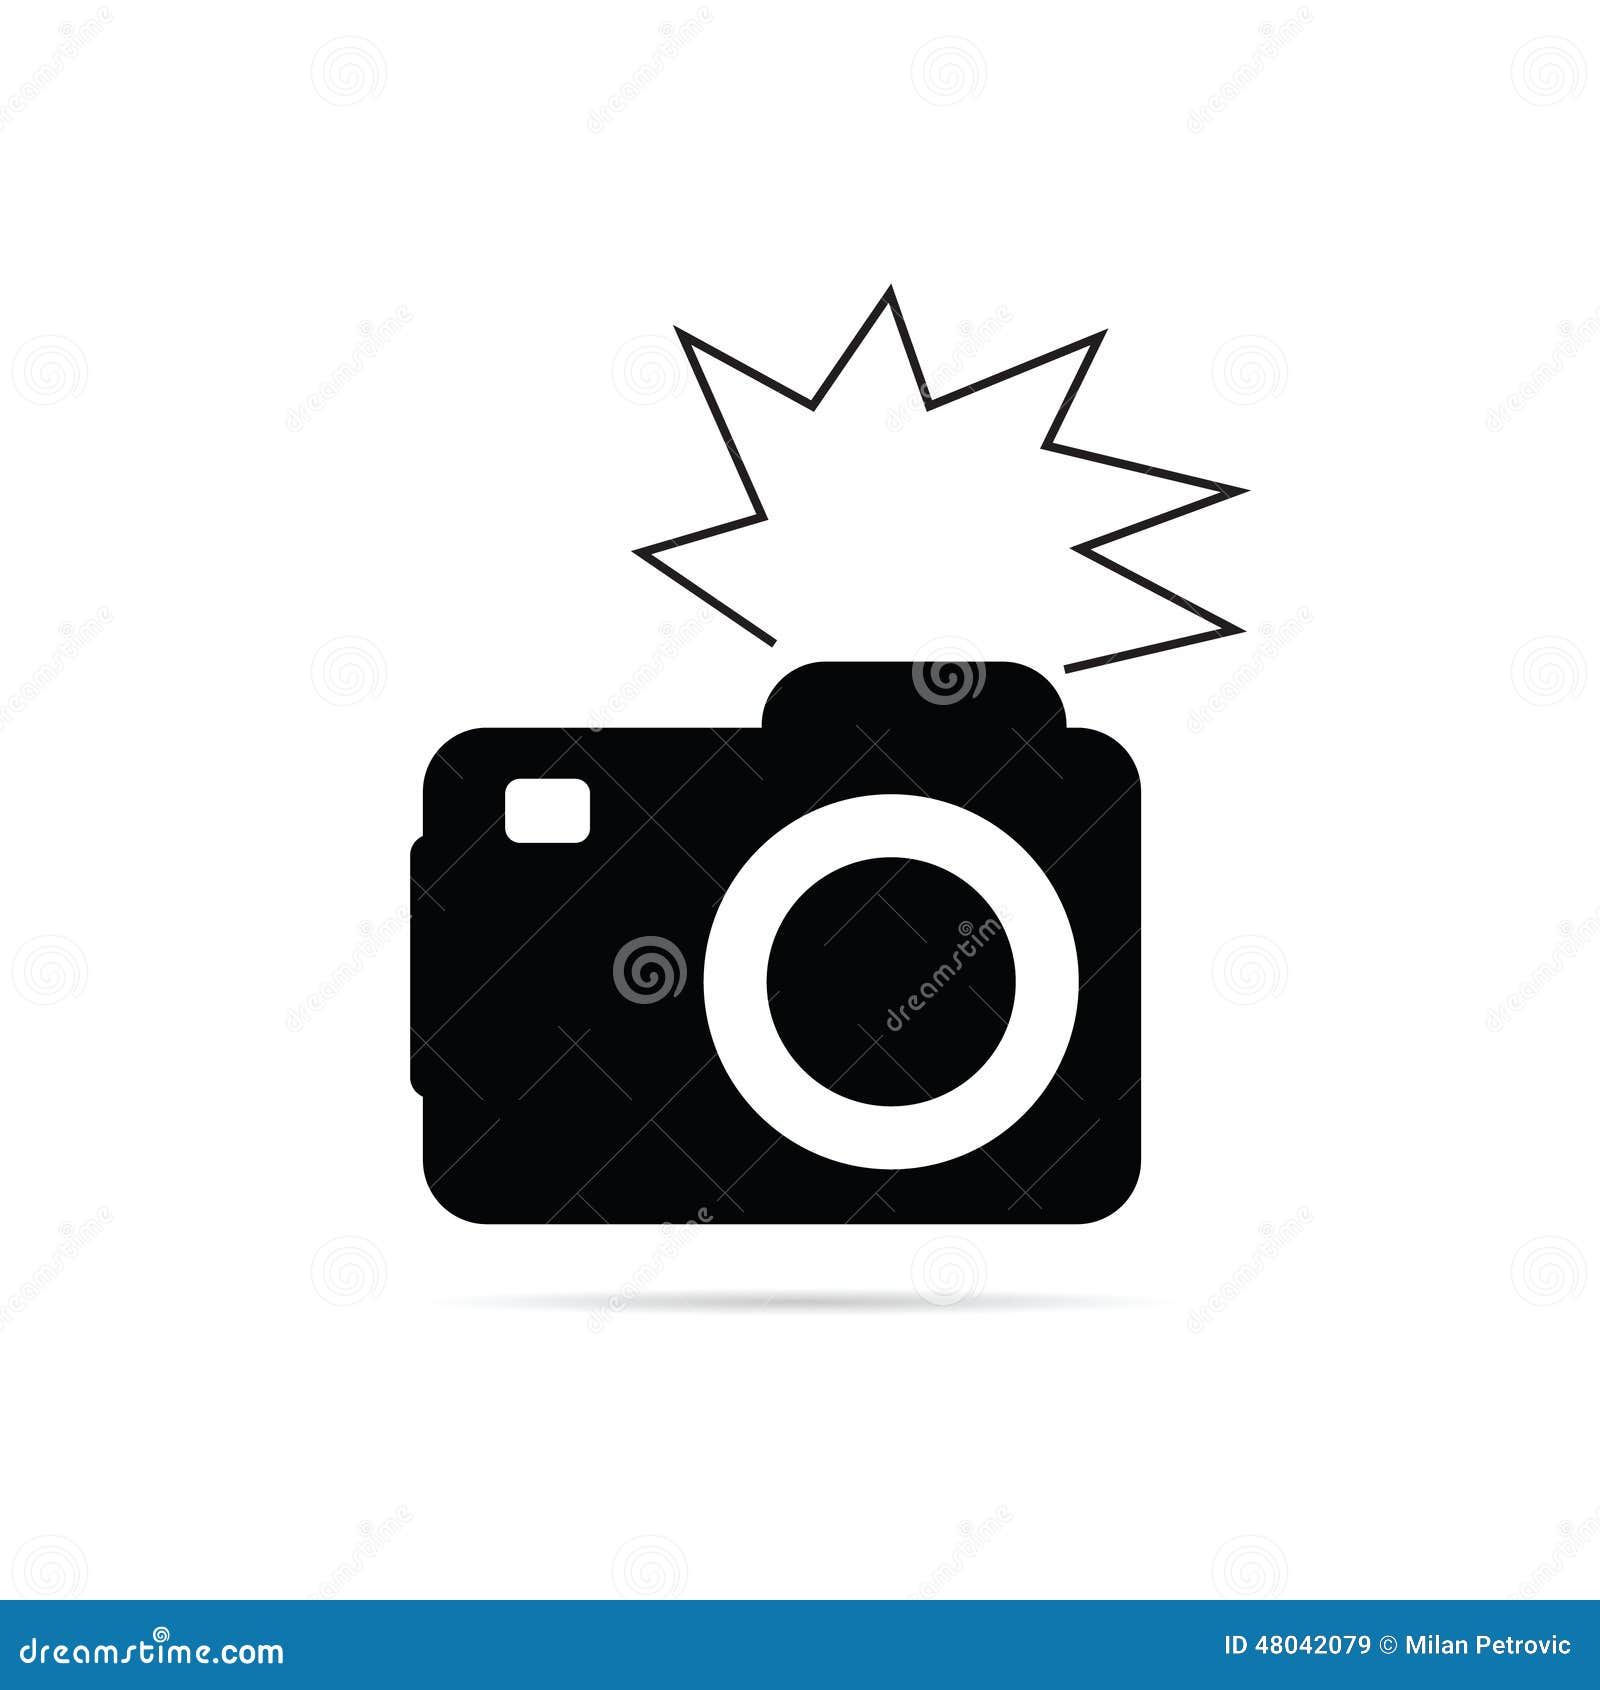 clipart of camera with flash - photo #9